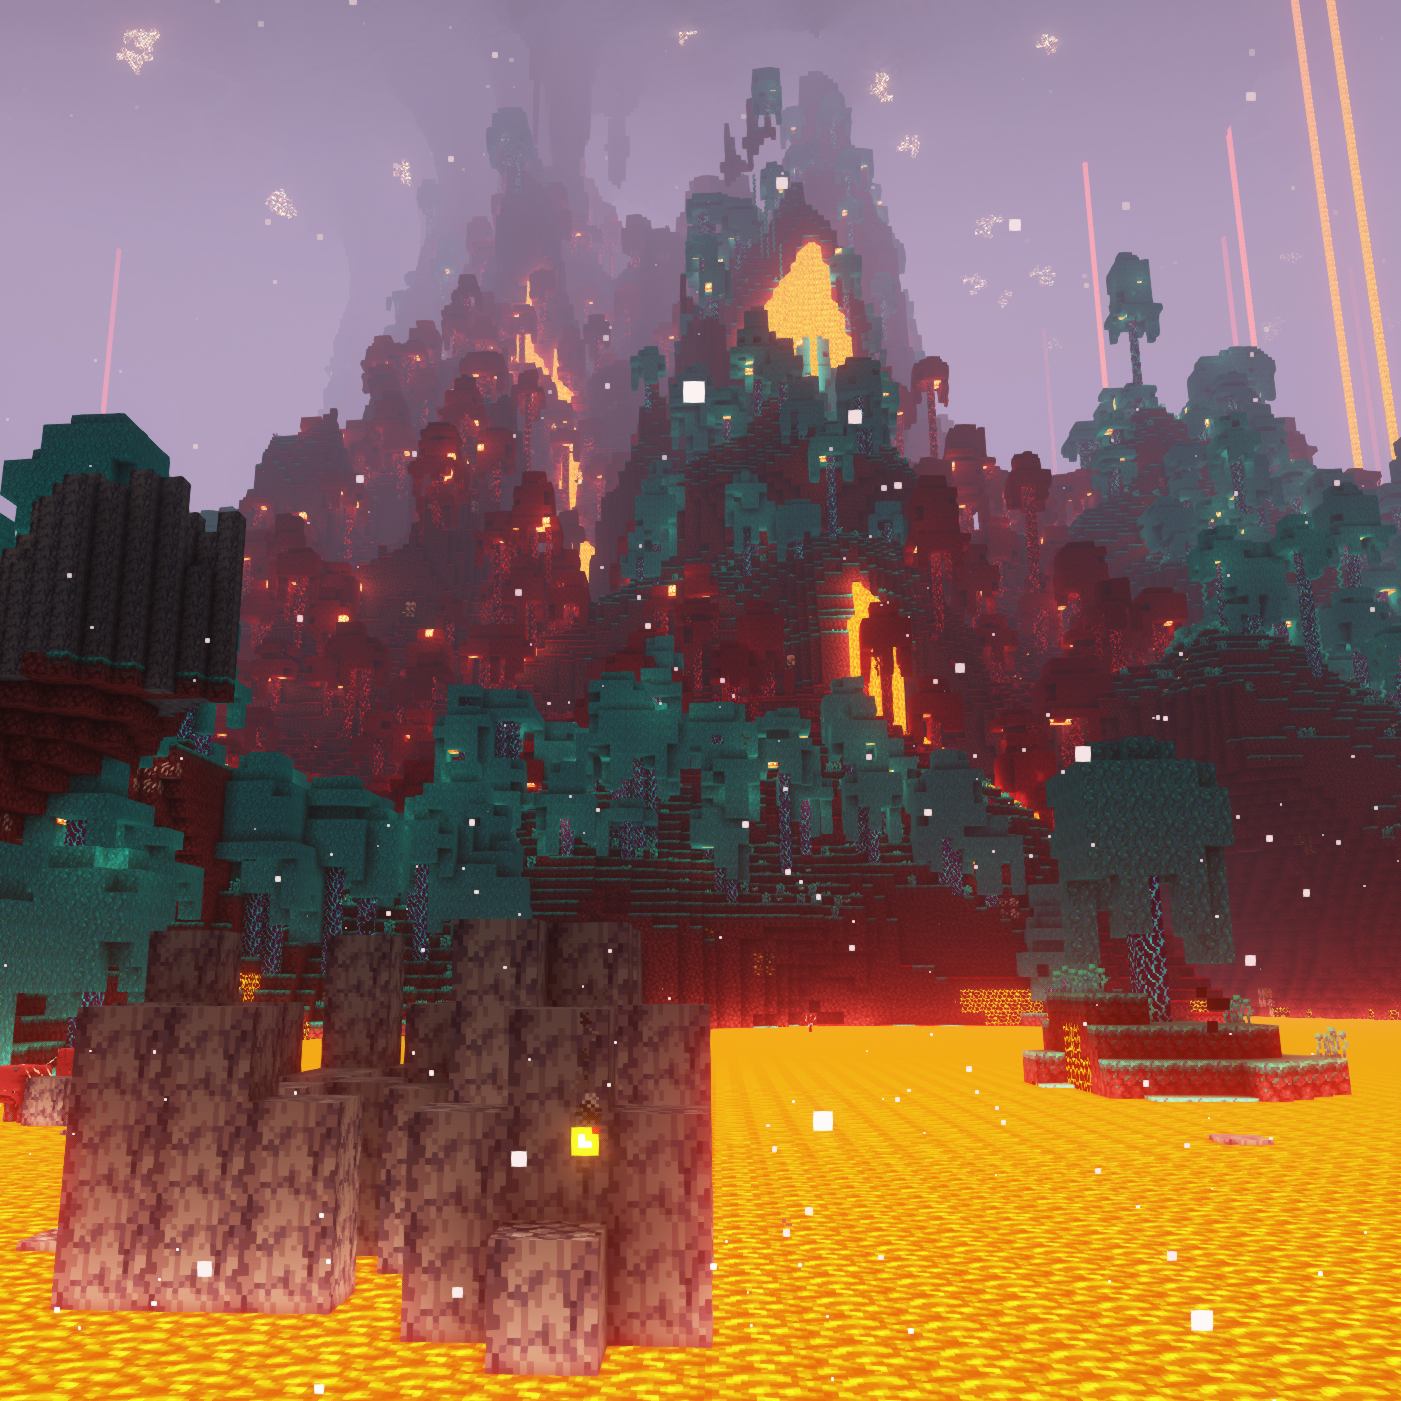 Nethered End Portal - Minecraft Mods - CurseForge